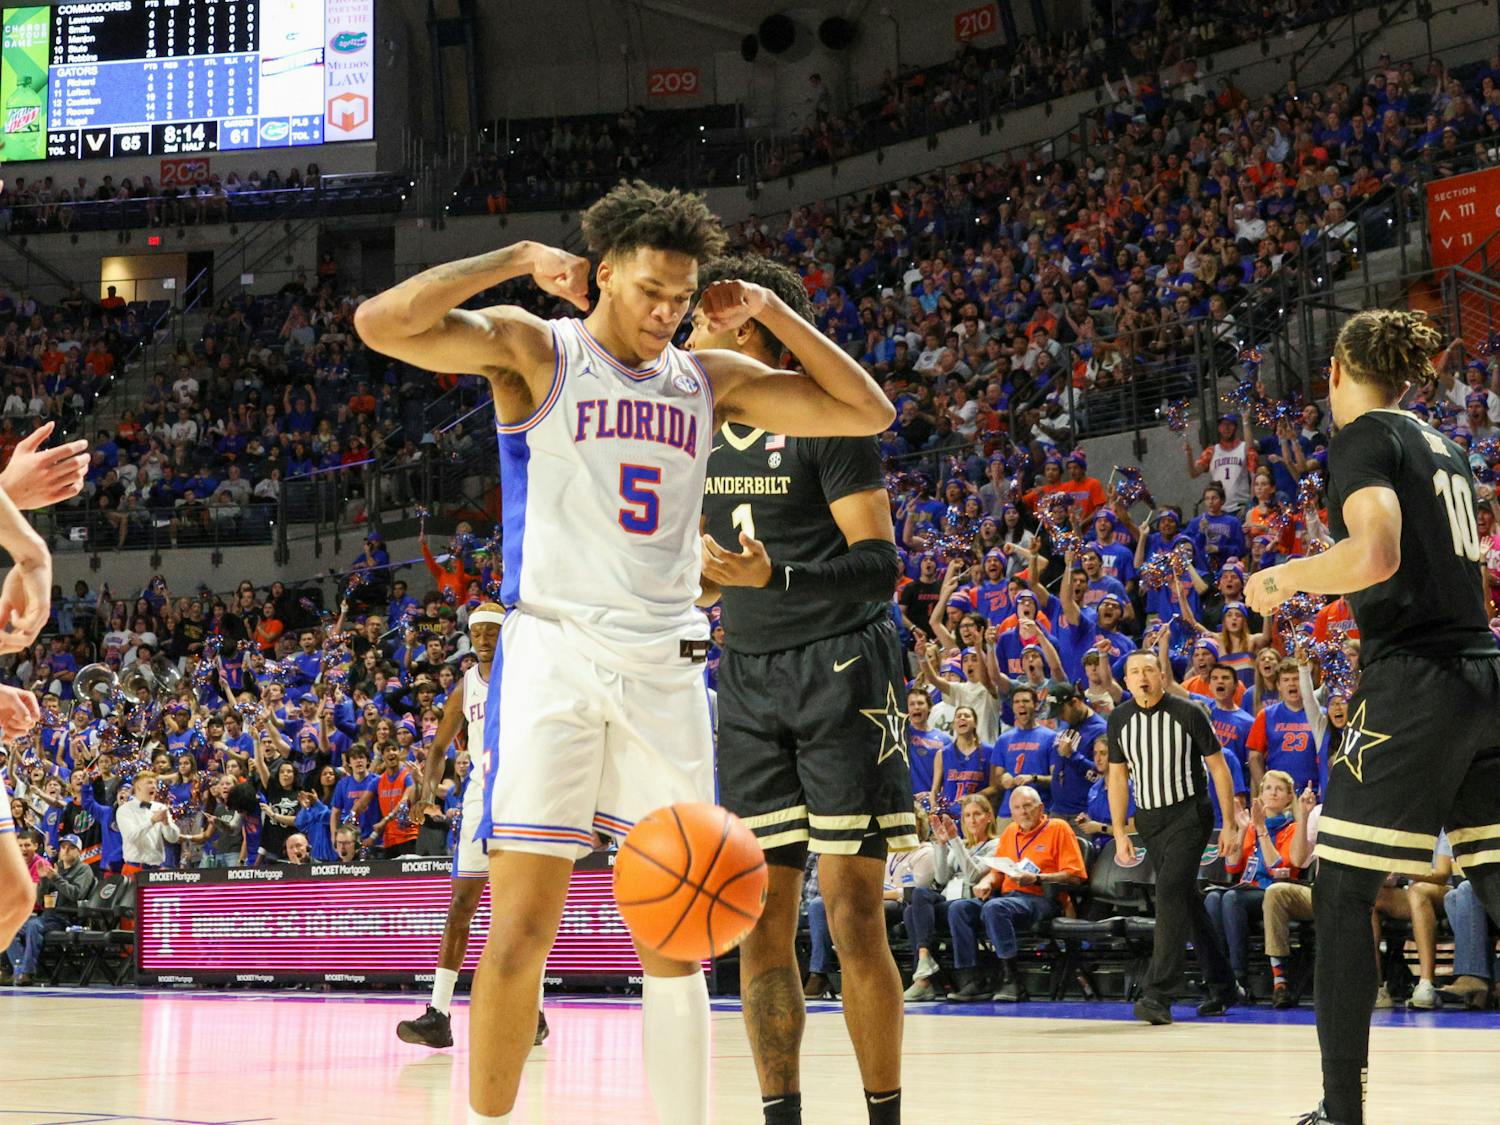 Gators guard Will Richard flexes after finishing a shot against the Vanderbilt Commodores in an 88-80 defeat, Saturday, Feb. 11, 2023. 